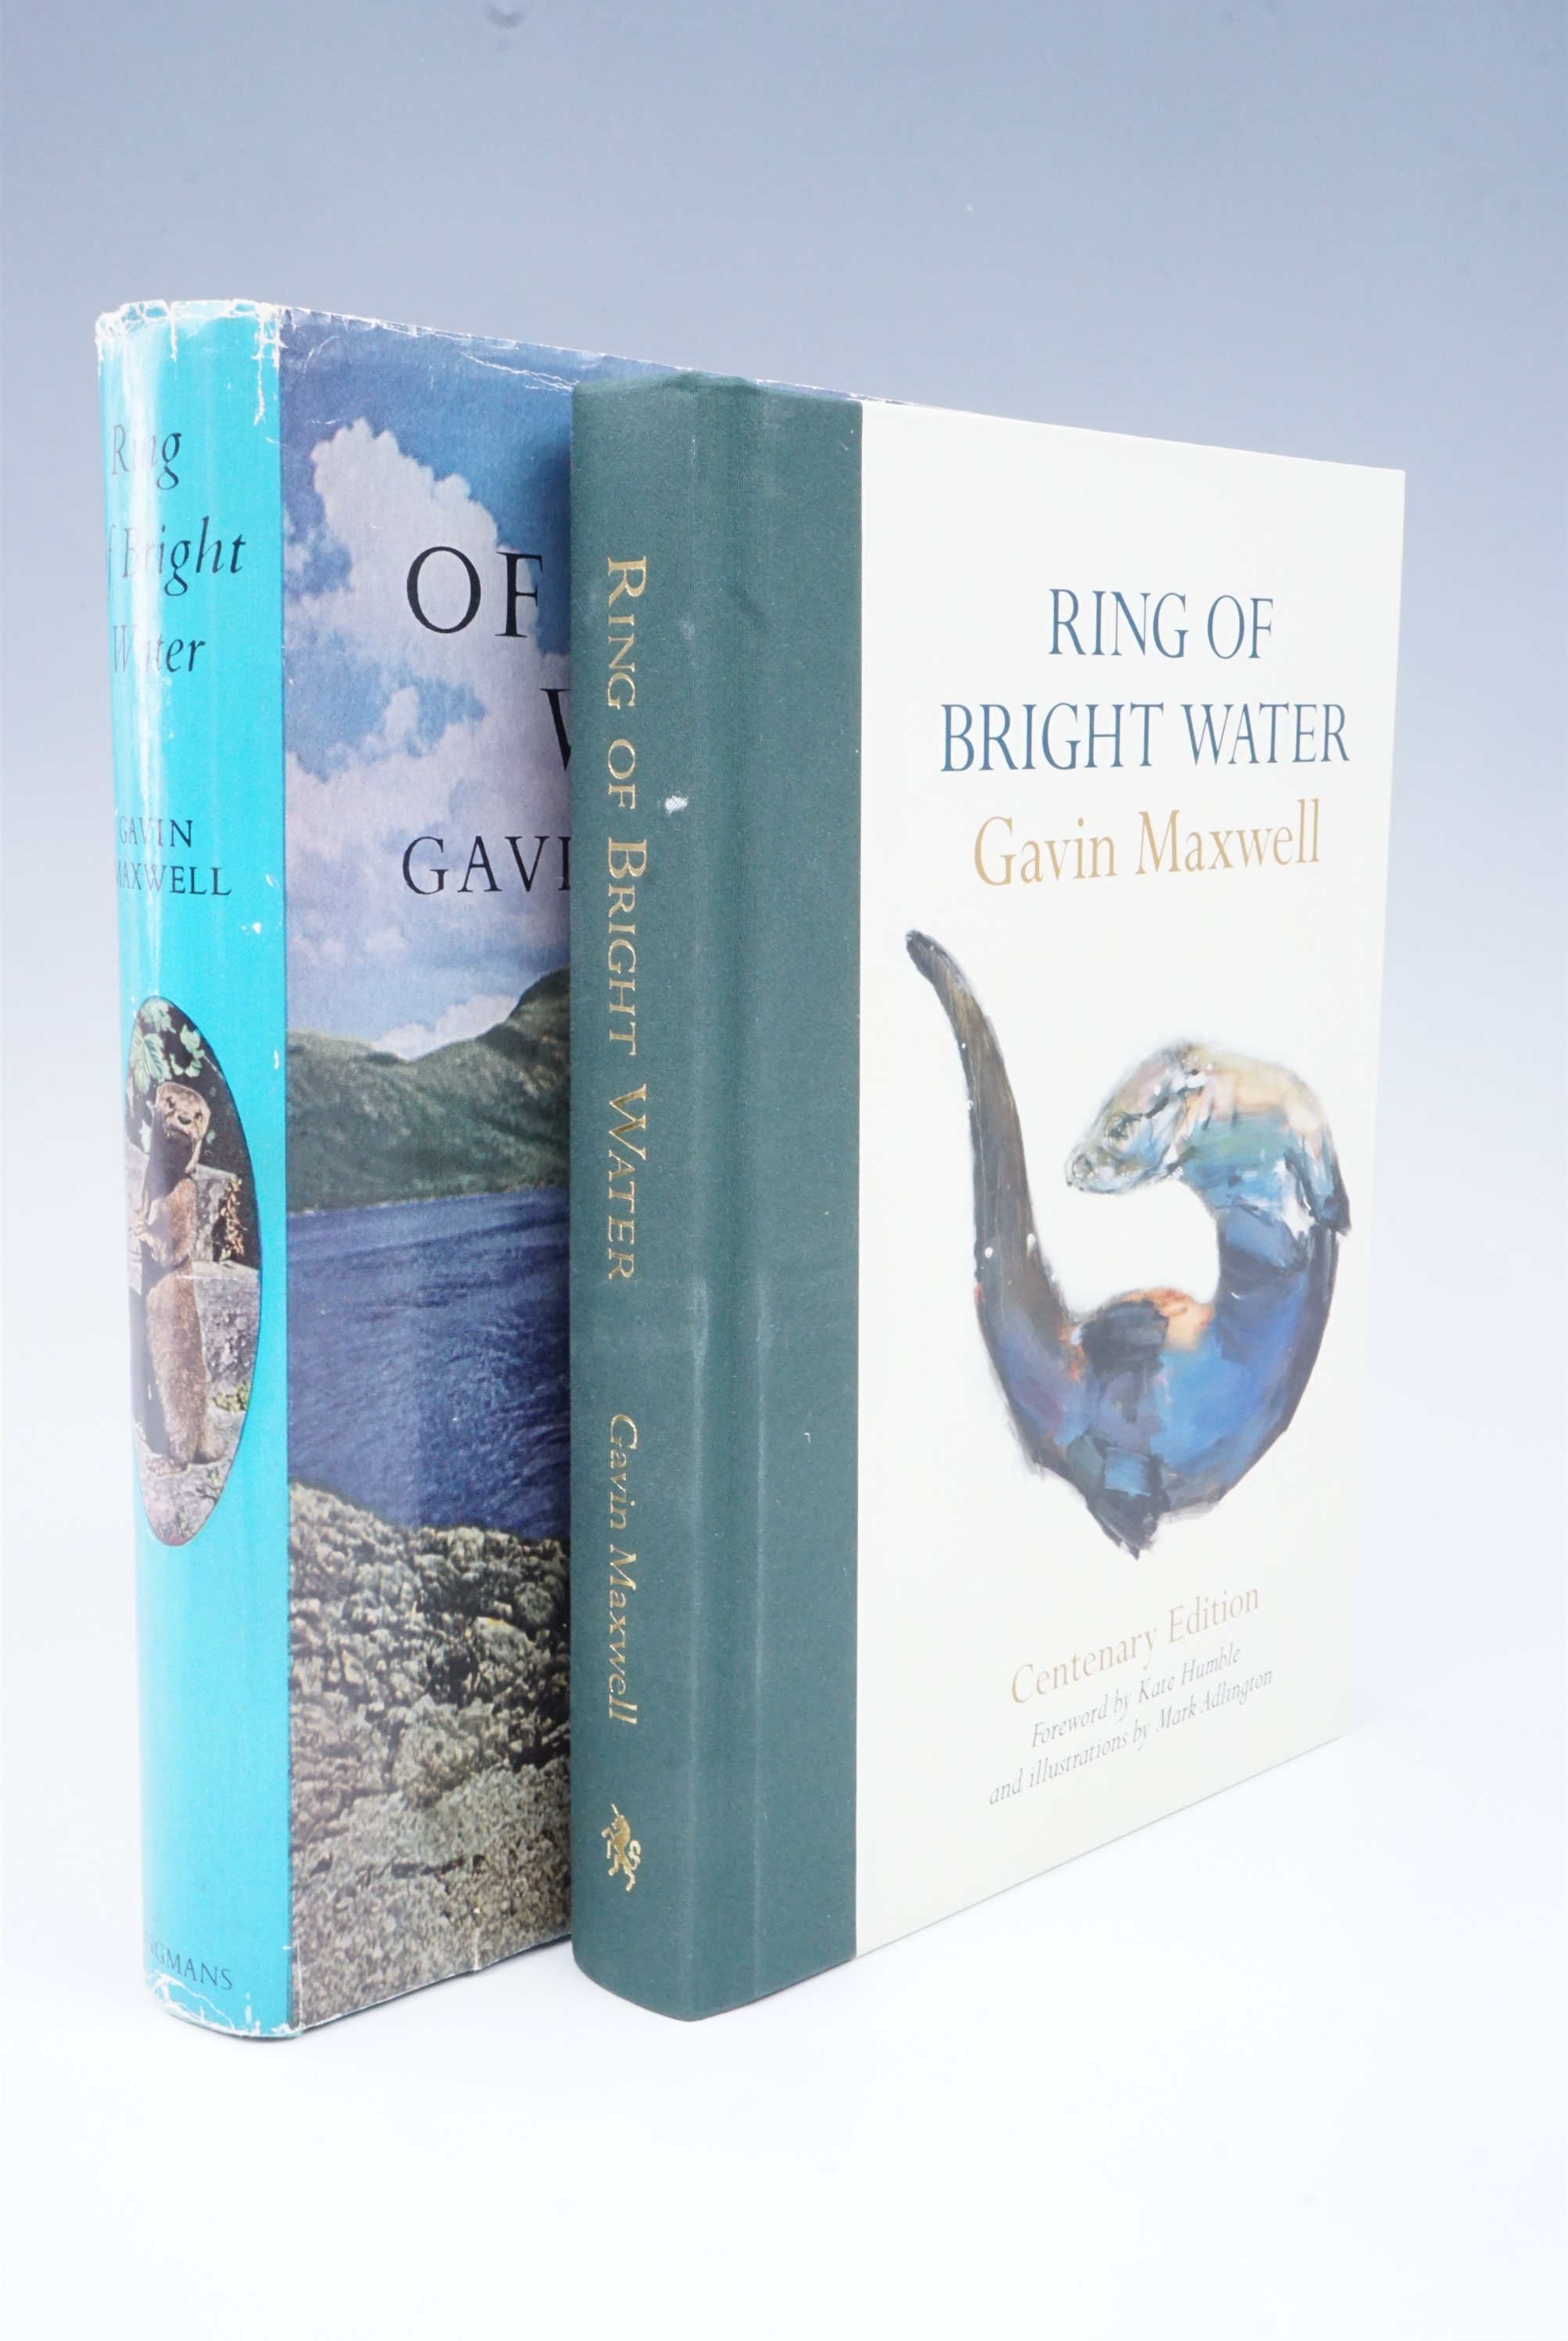 Gavin Maxwell "Ring of Bright Water", 1960, together with the "Centenary Edition"